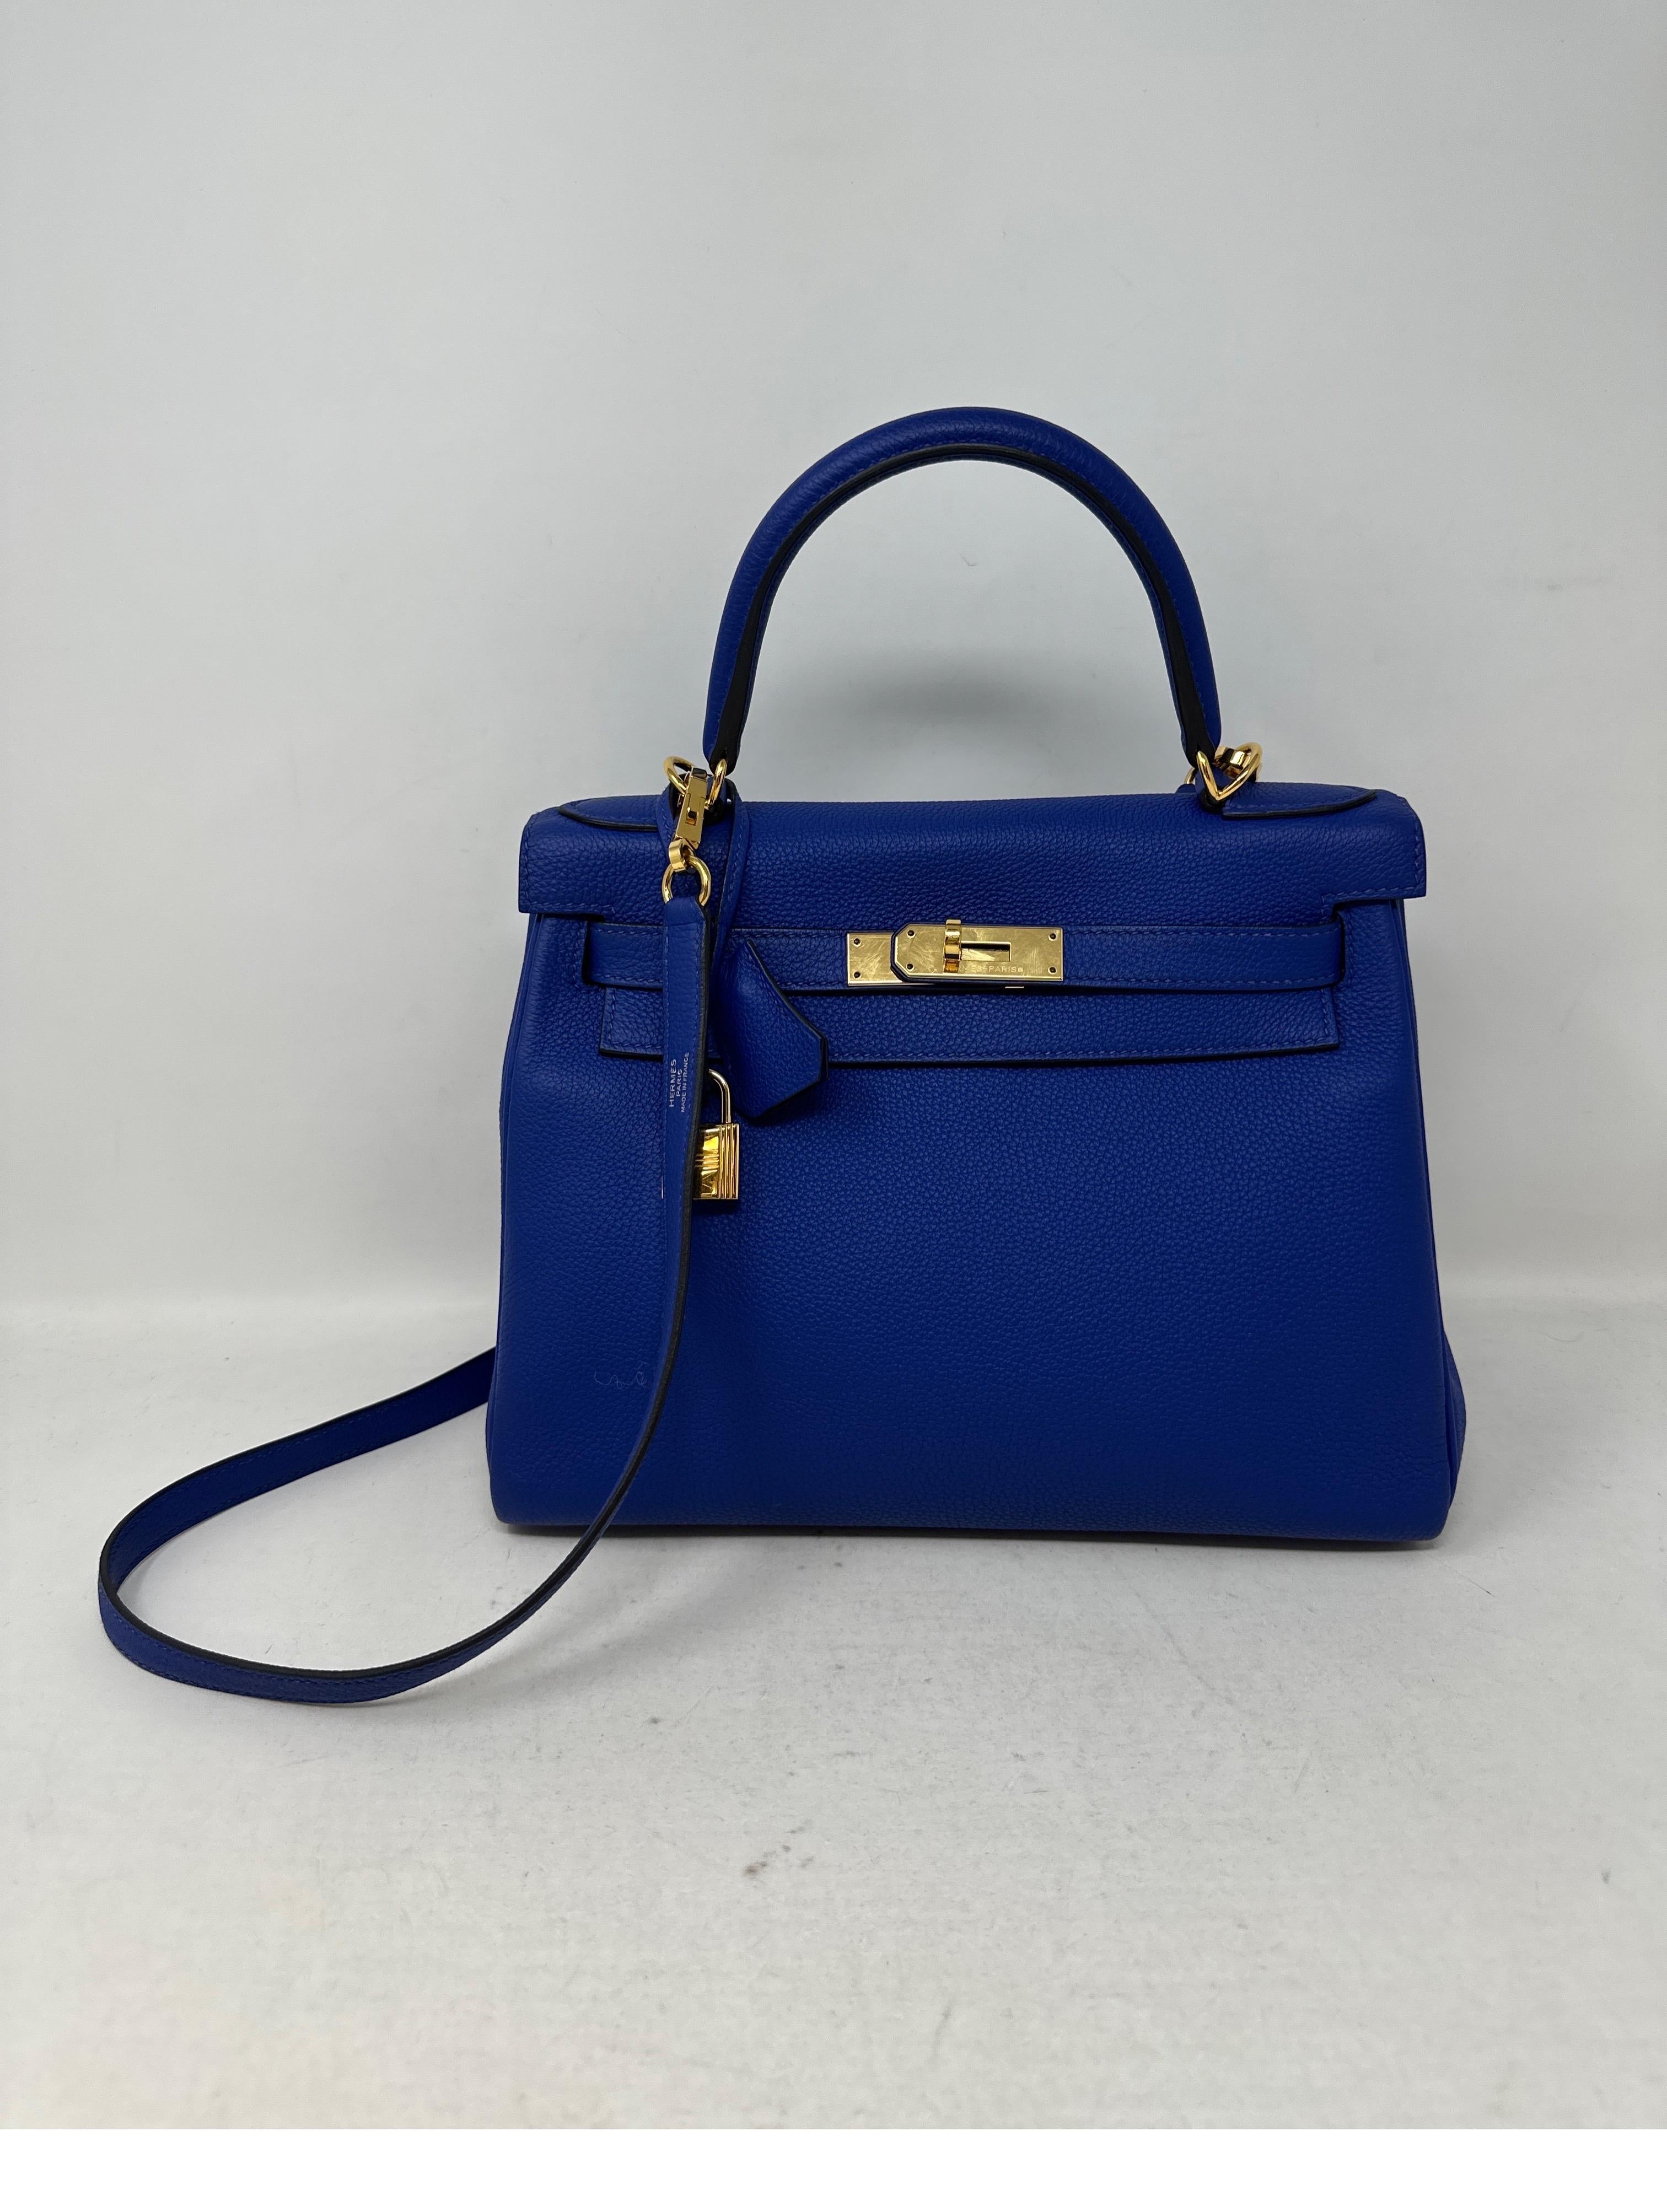 Hermes Kelly 28 Bleu Electric Bag. Togo leather in most wanted blue color. Gold hardware. R stamp. Rare combination and most desired Kelly size 28. Demand for small Kelly bags are going up. Includes clochette, lock, keys, and dust bag. Guaranteed